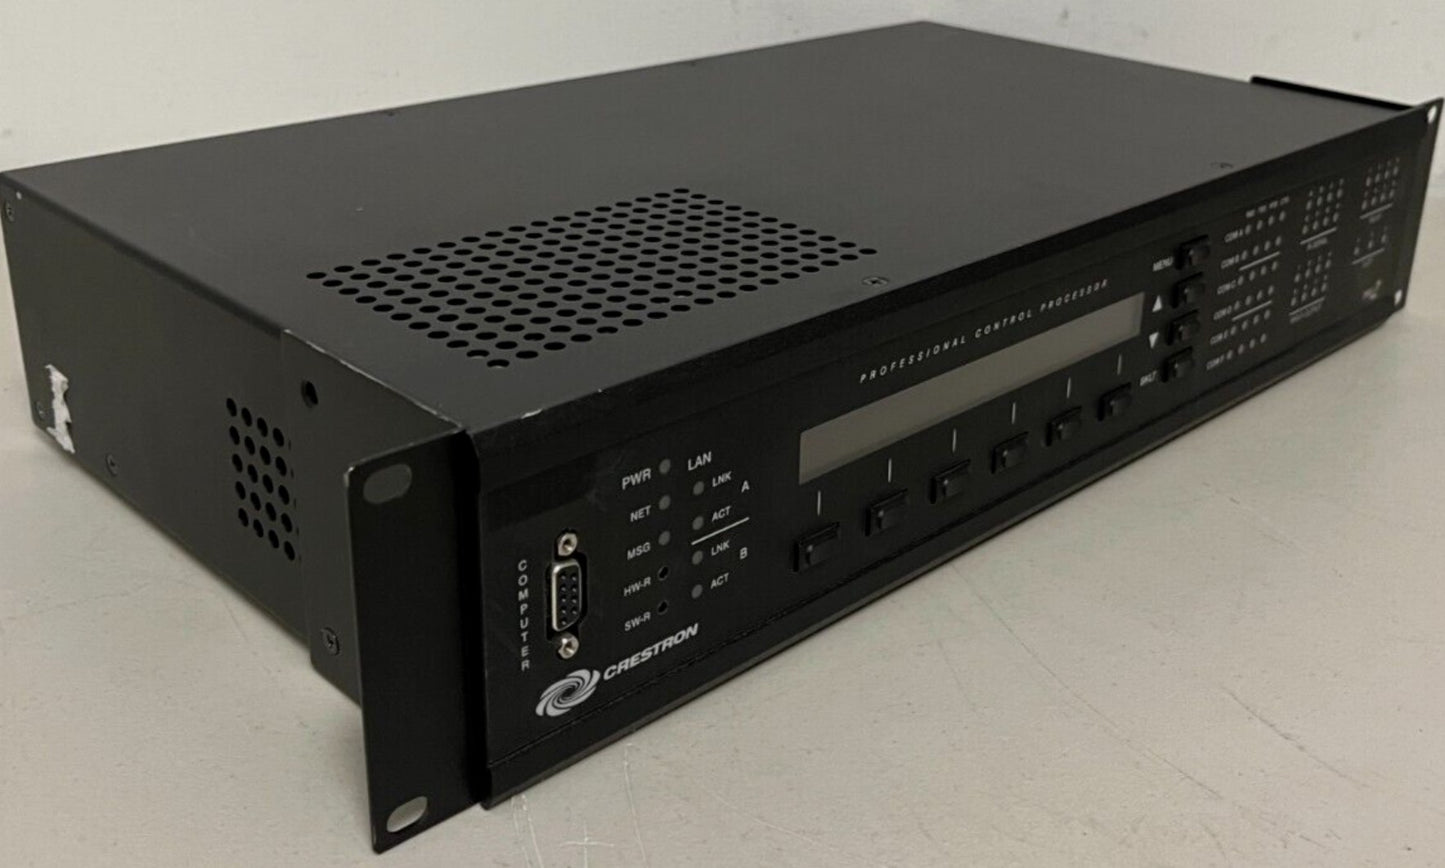 Crestron Pro2 Professional Dual Bus Control Processor. 					We Sell Professional Audio Equipment. Audio Systems, Amplifiers, Consoles, Mixers, Electronics, Entertainment, Sound, Live.